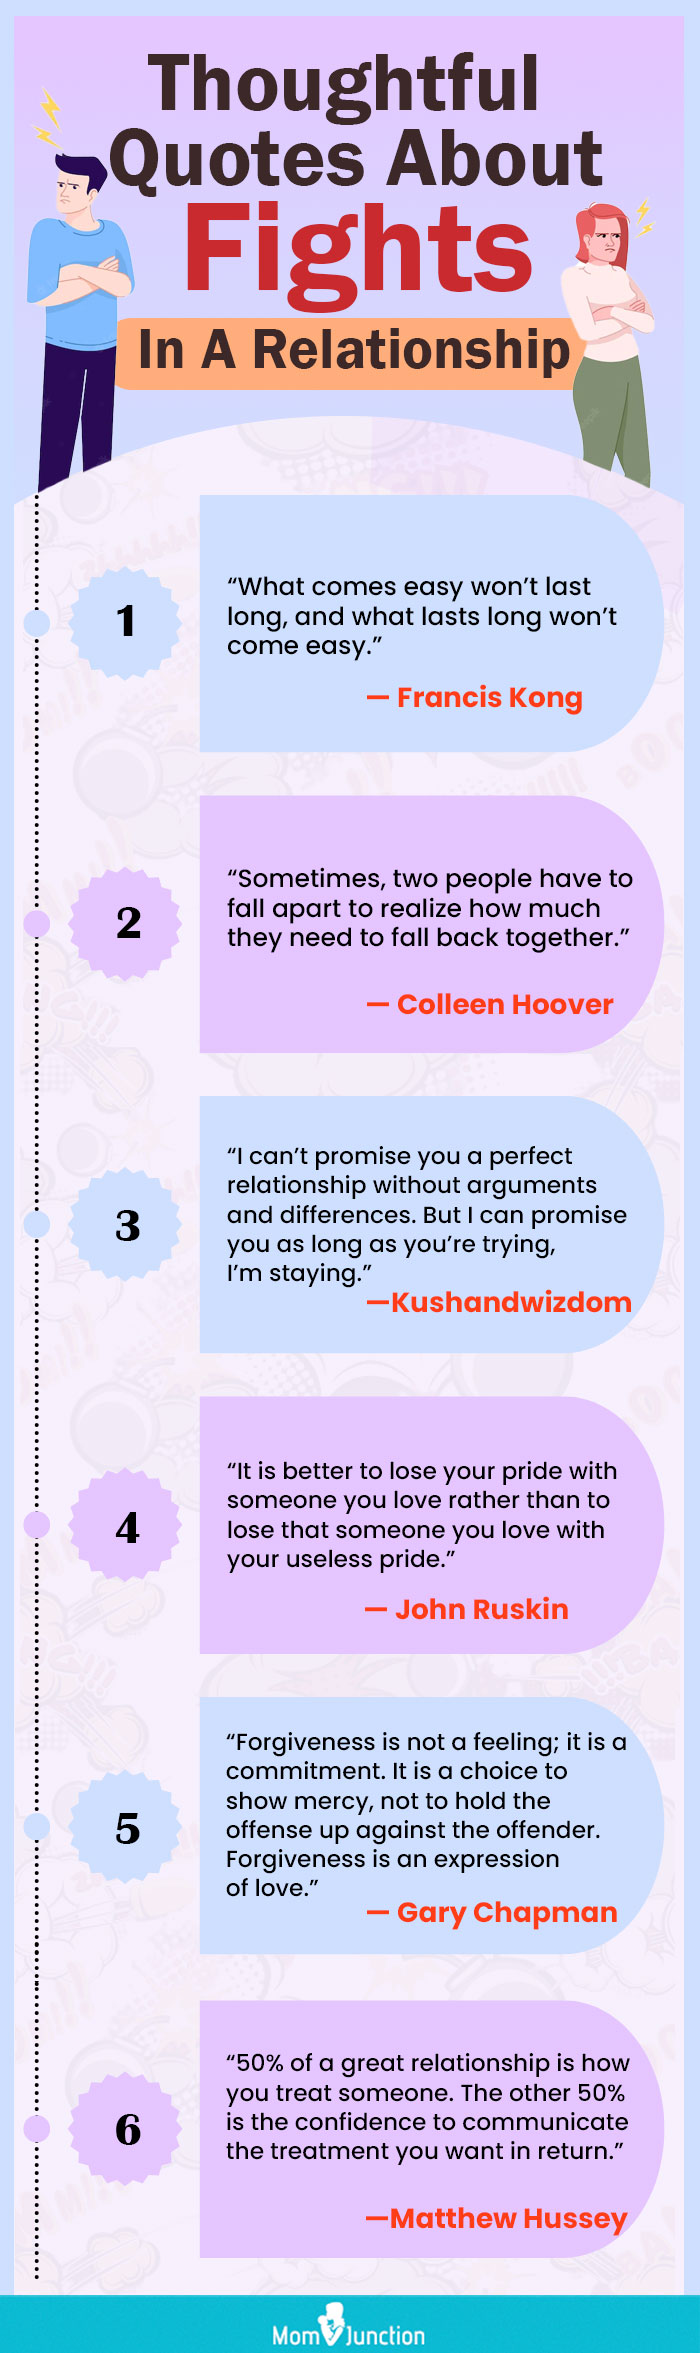 thoughtful quotes about fights in a relationship (infographic)